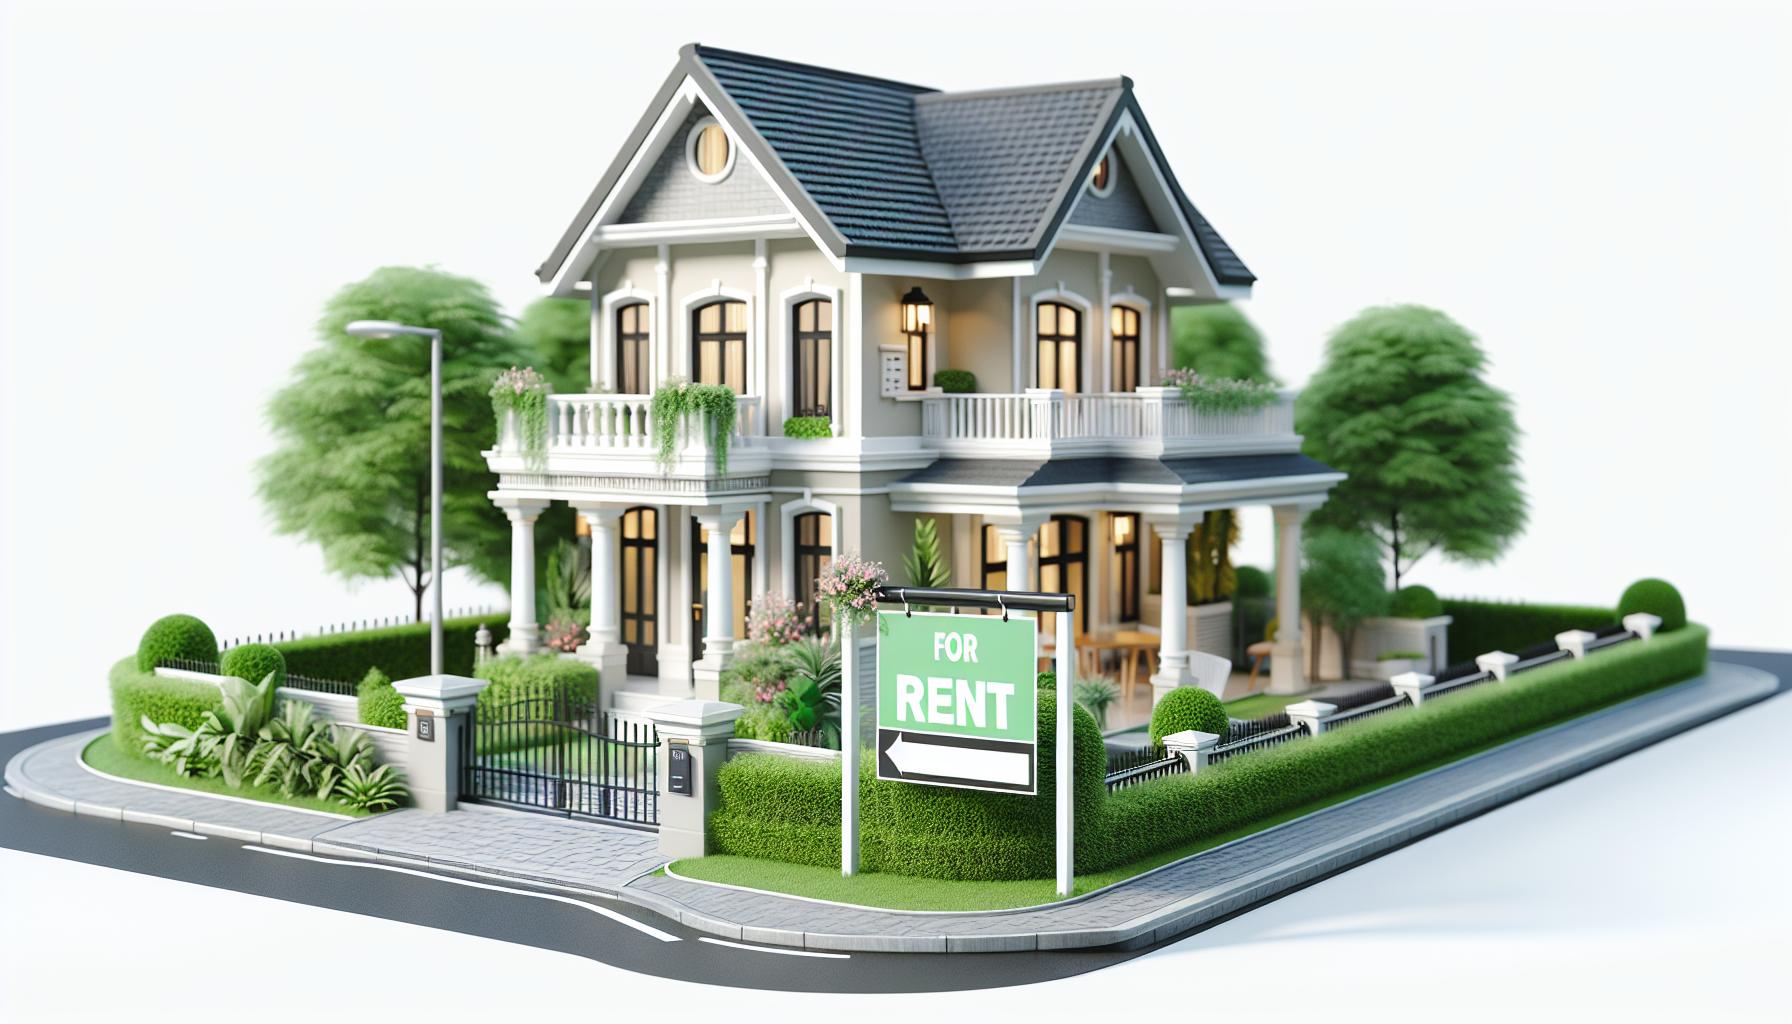 A 3d model of a house with a rent sign on it.